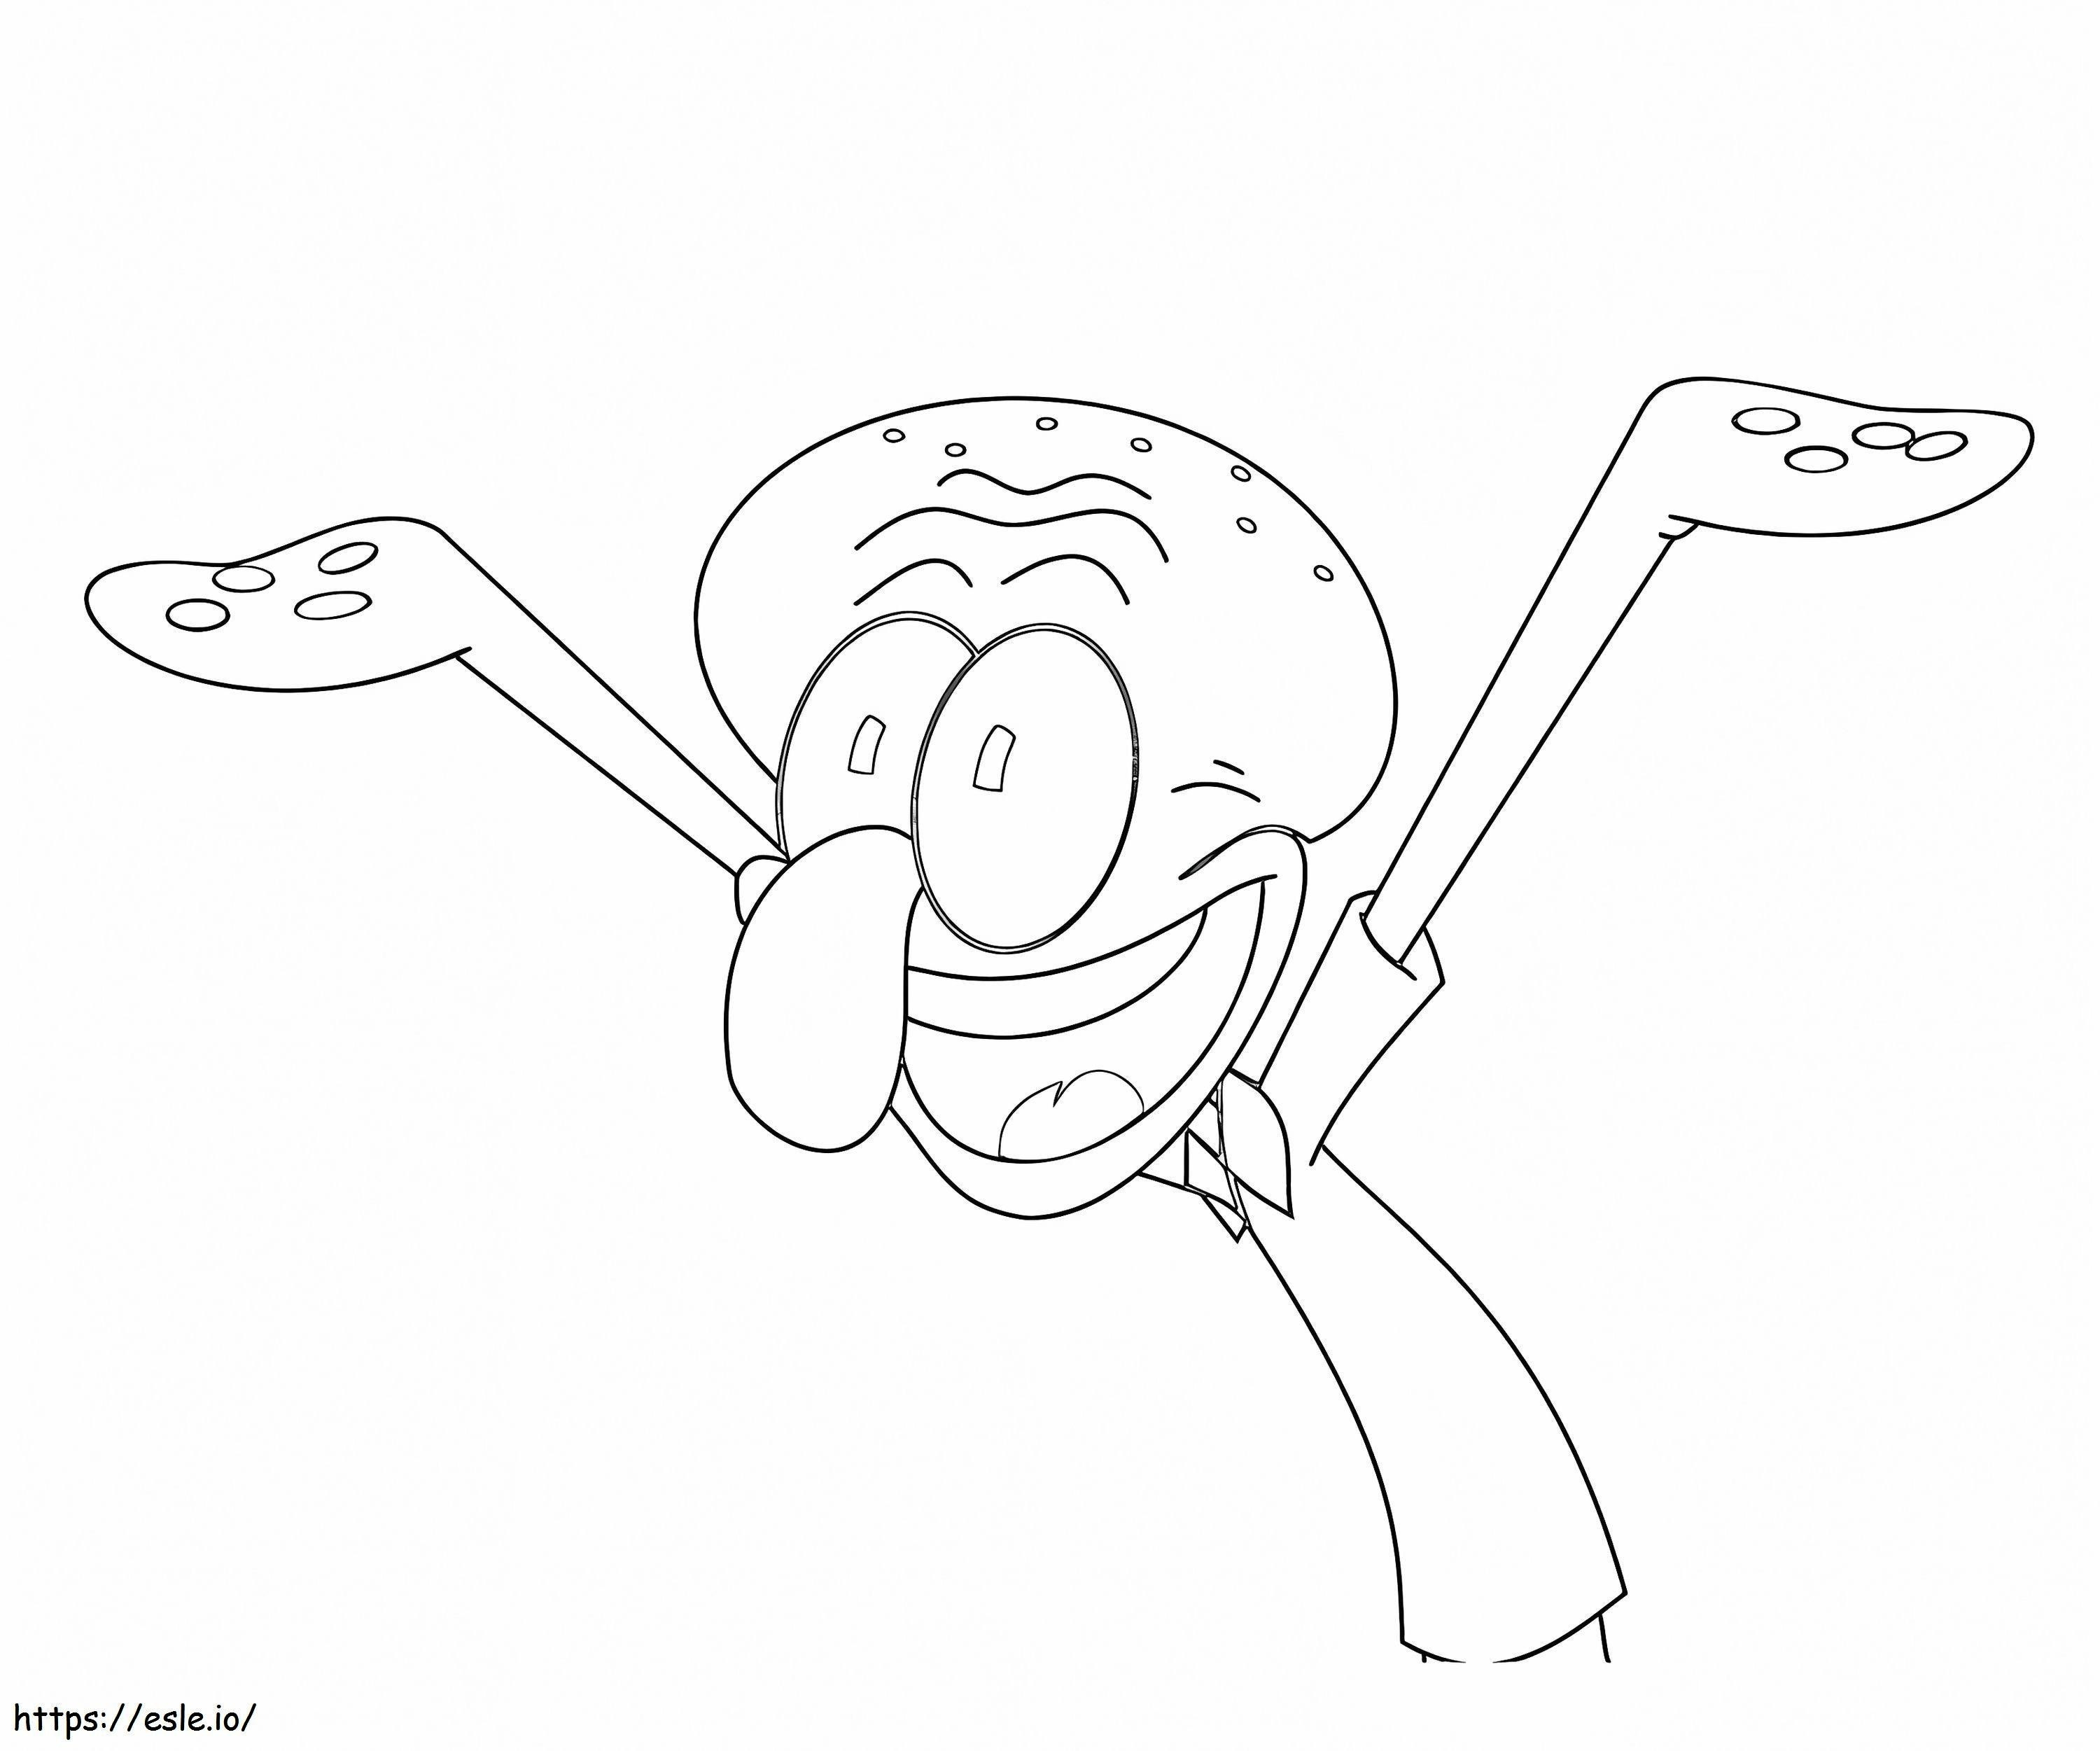 Squidward Is Happy coloring page